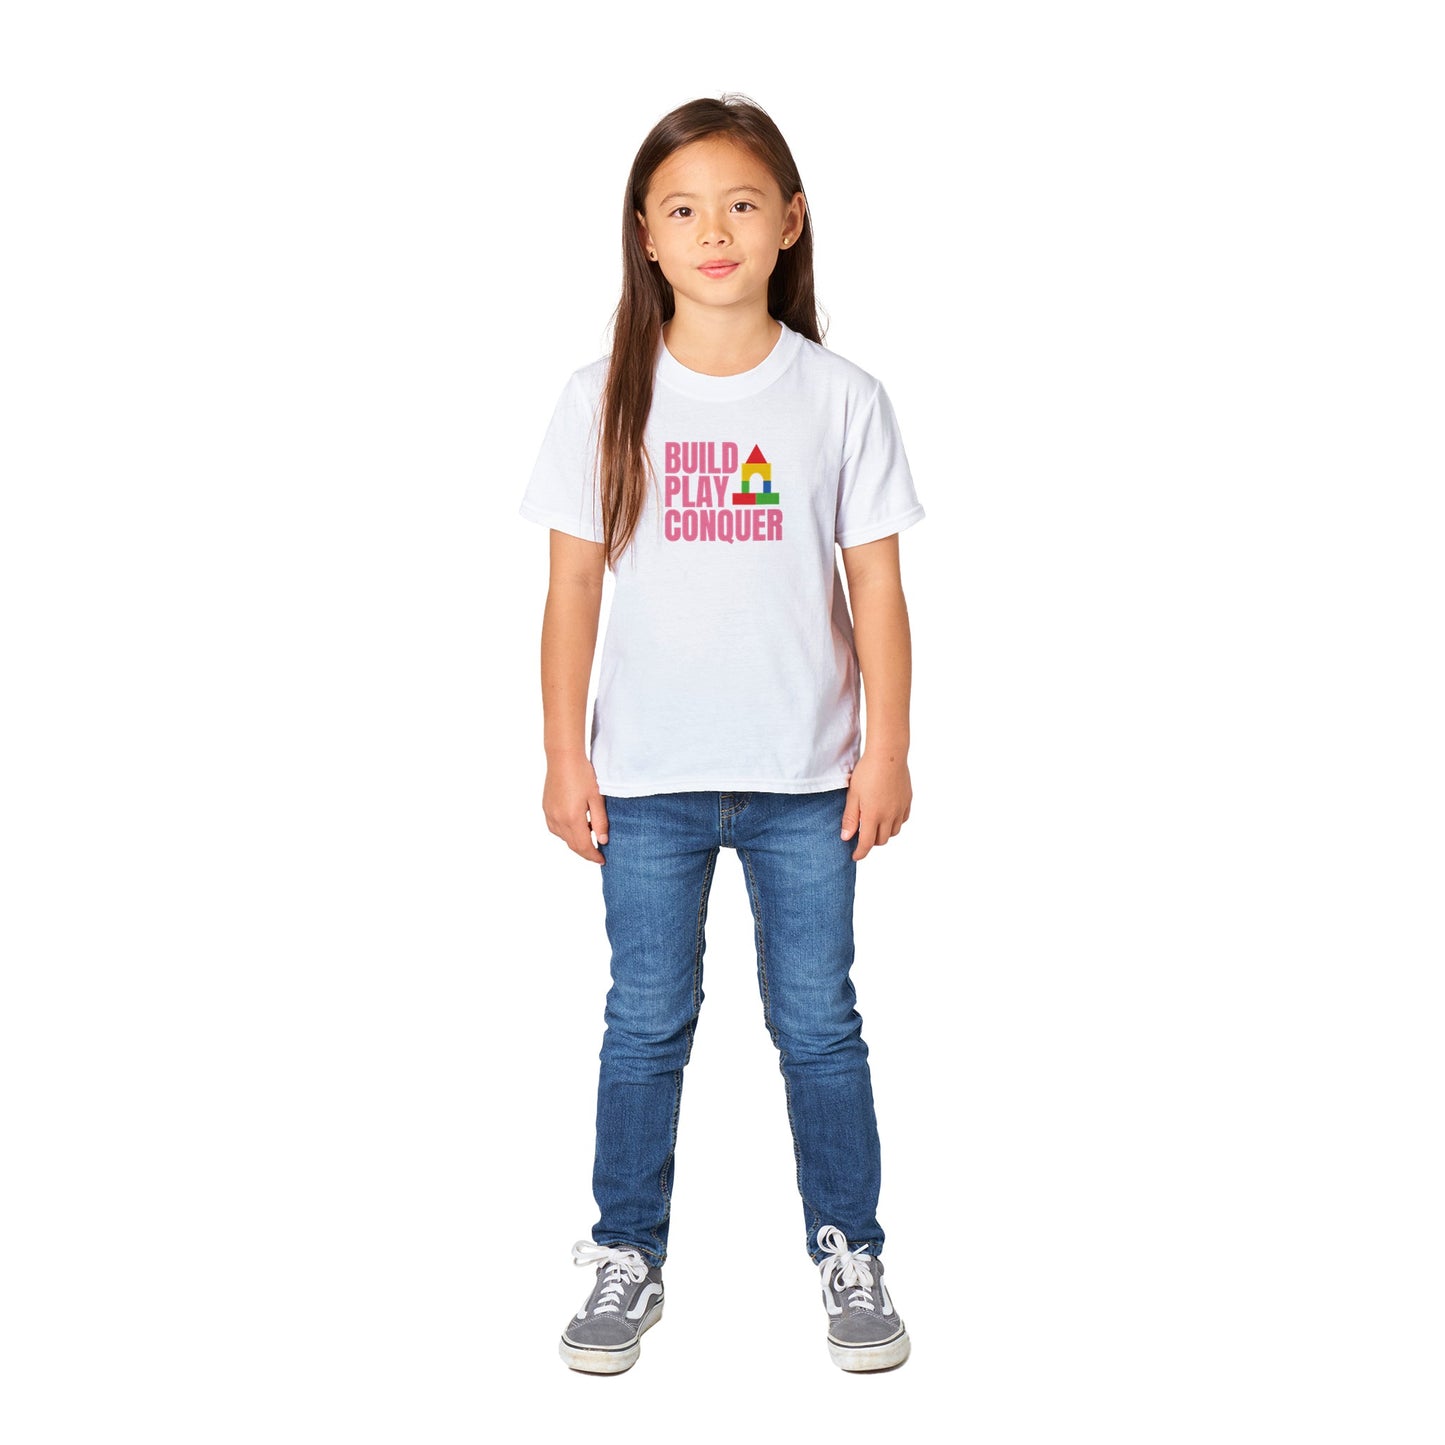 Kids Build Play Conquer Classic T-shirt